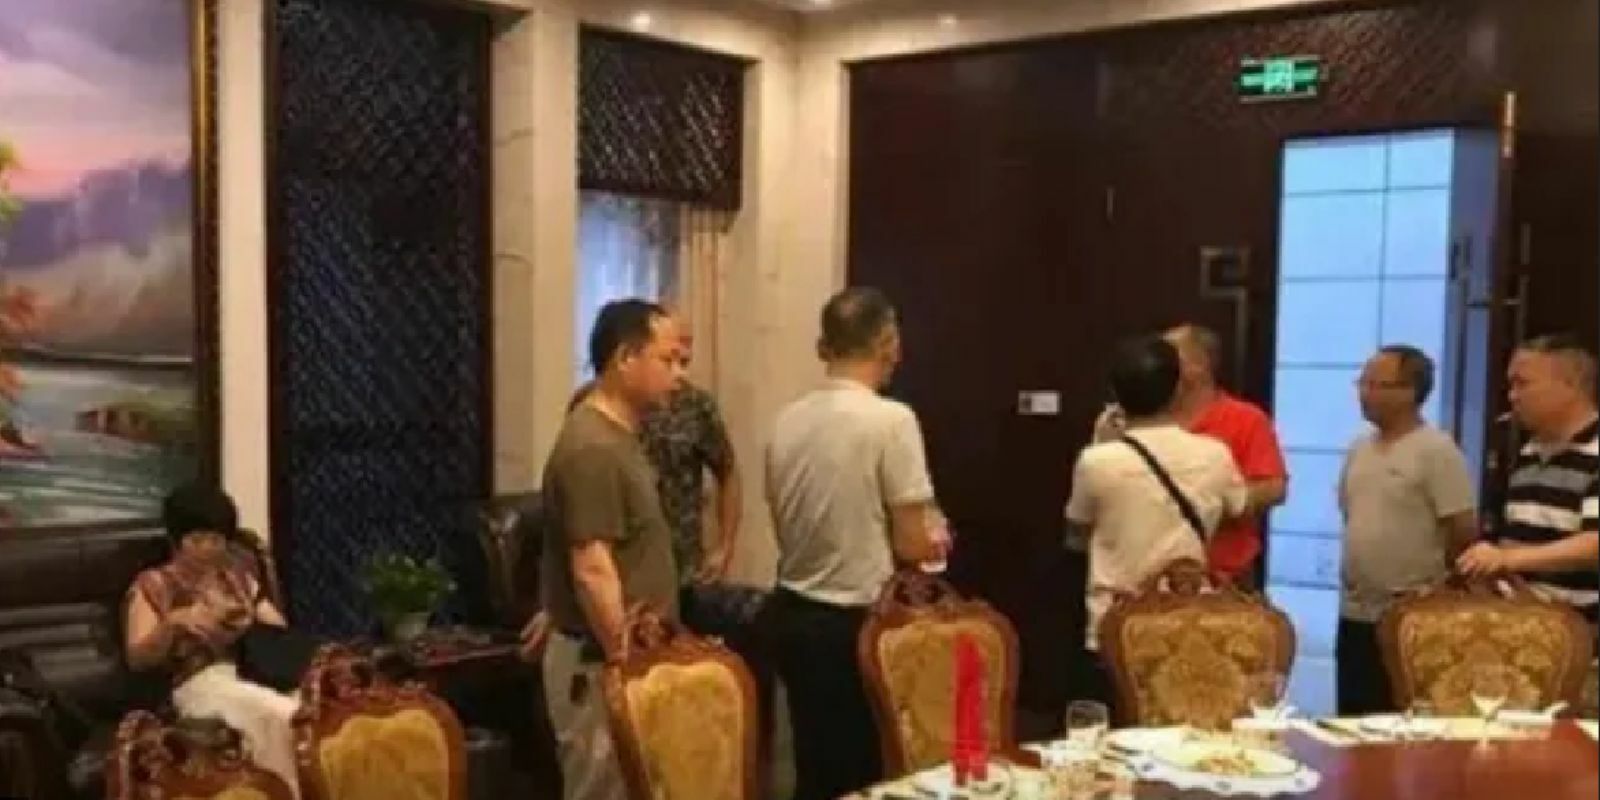 Man leaves after woman brings 23 relatives on first date, takes legal action Thaiger pic image